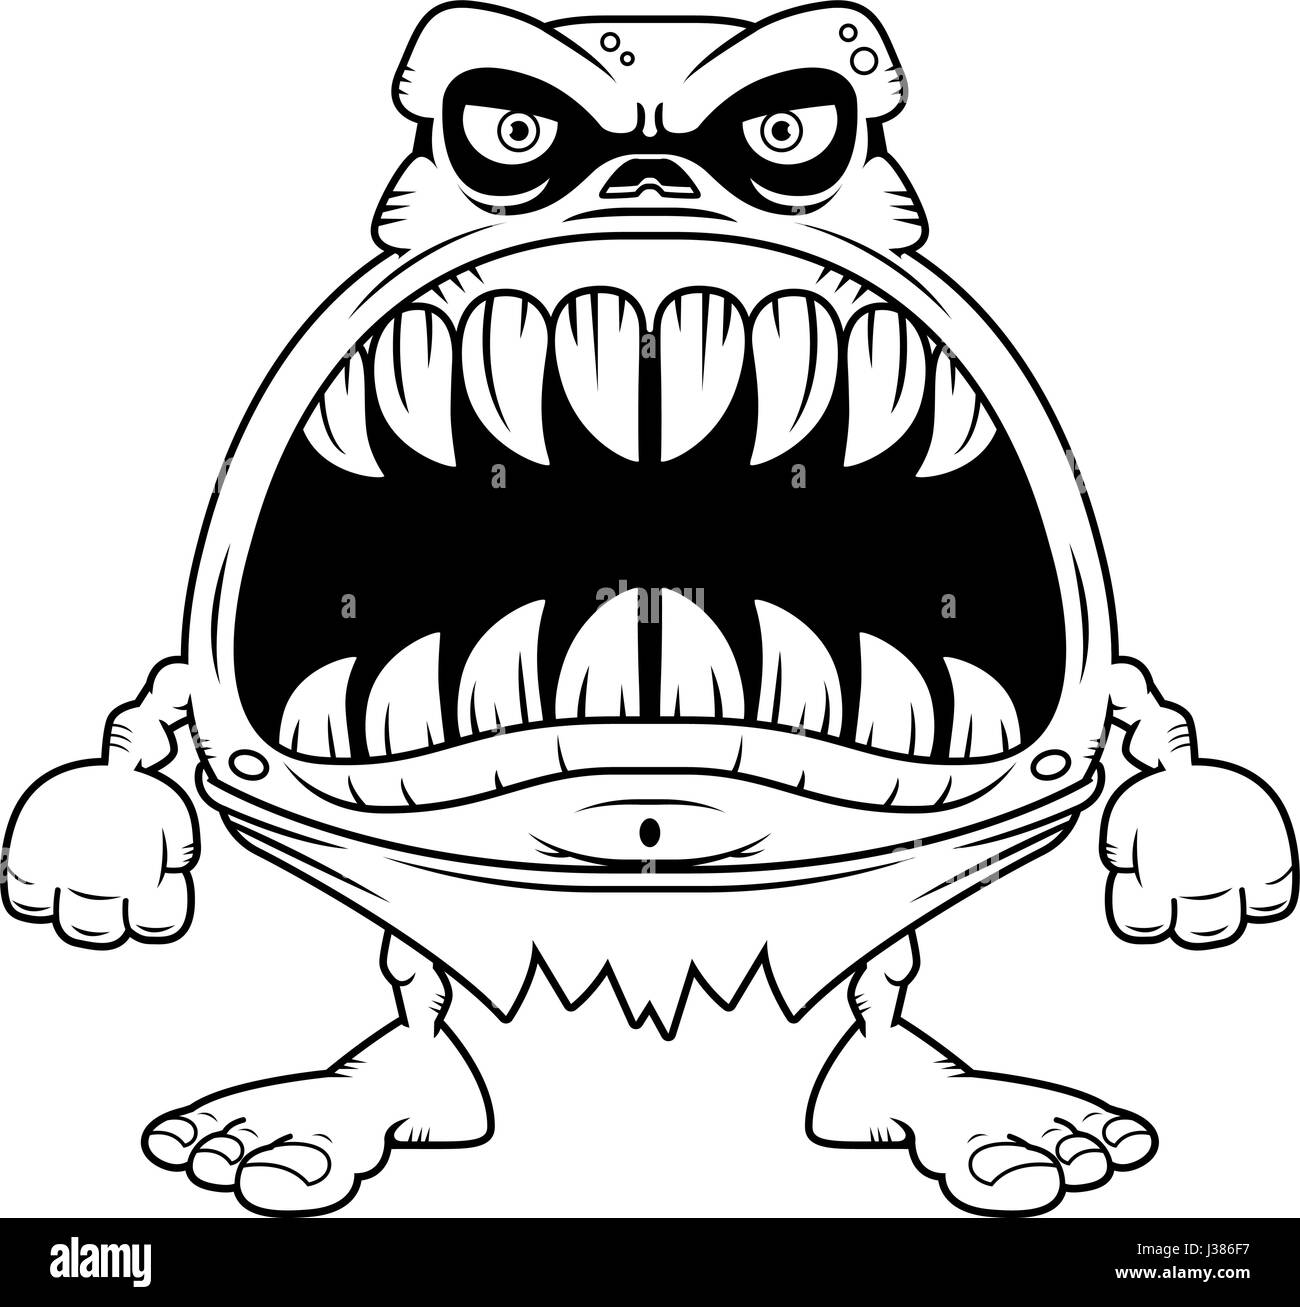 A cartoon illustration of a ghoul with a big mouth full of sharp teeth. Stock Vector